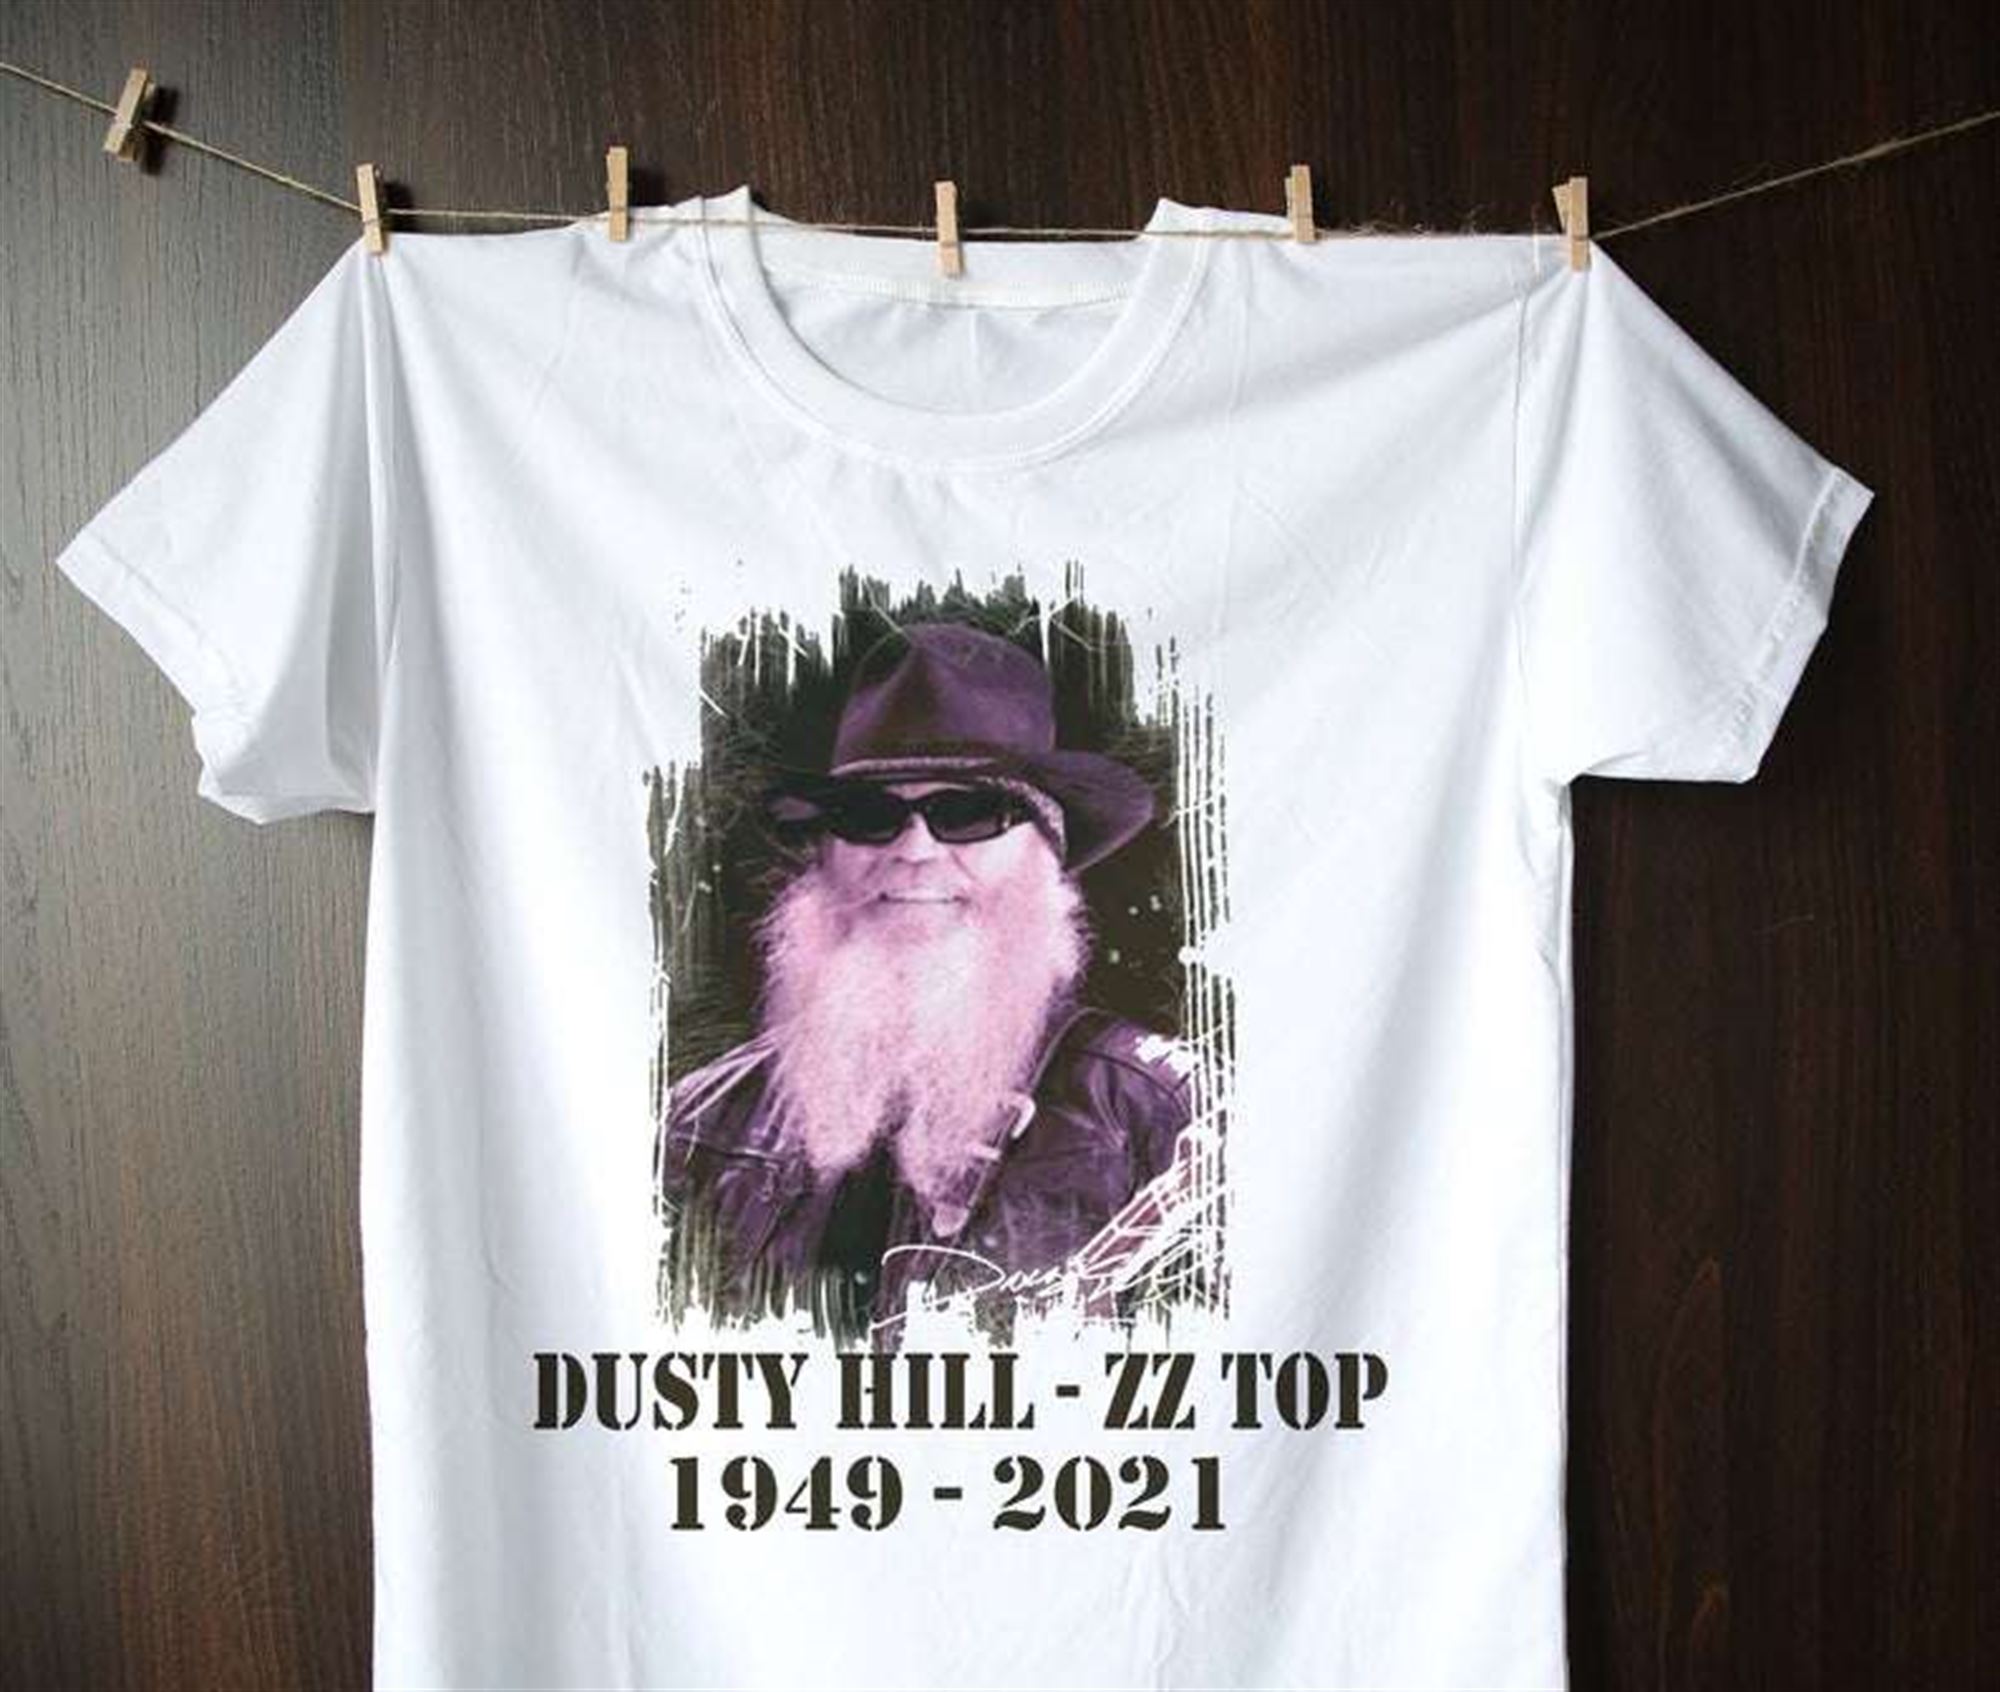 Dusty Hill Zz Top 1949-2021 Rip T Shirt Size Up To 5xl